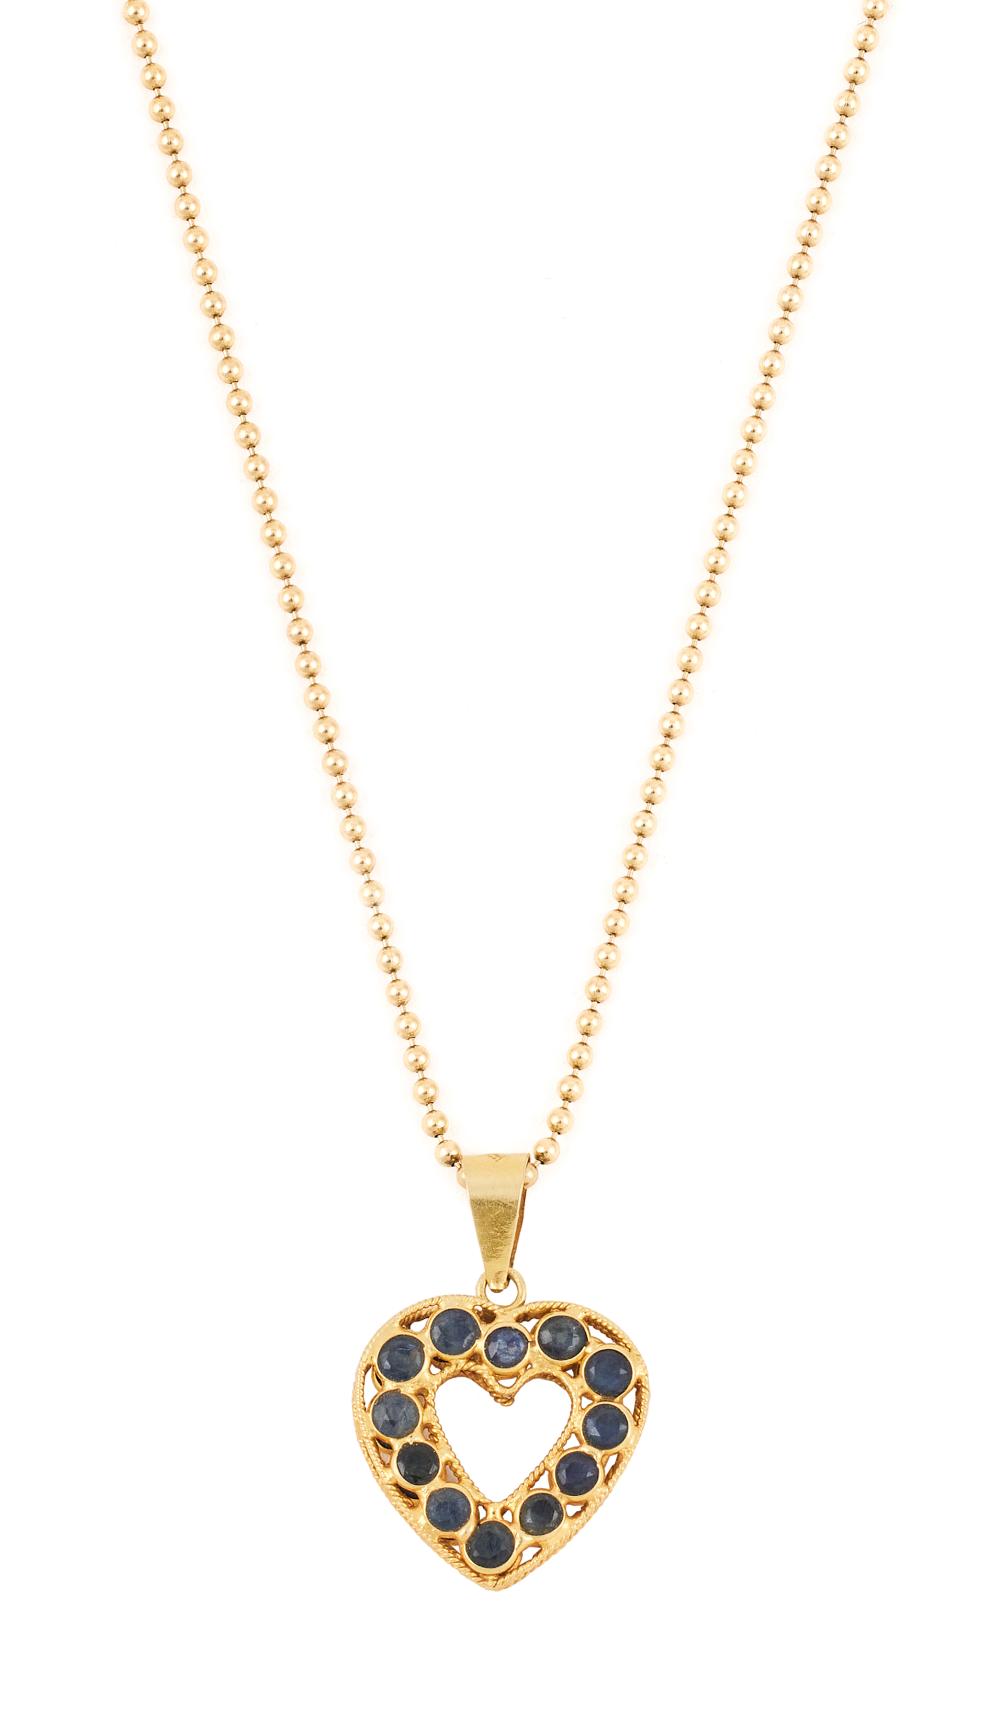 18KT YELLOW GOLD AND SAPPHIRE PENDANT 350b88